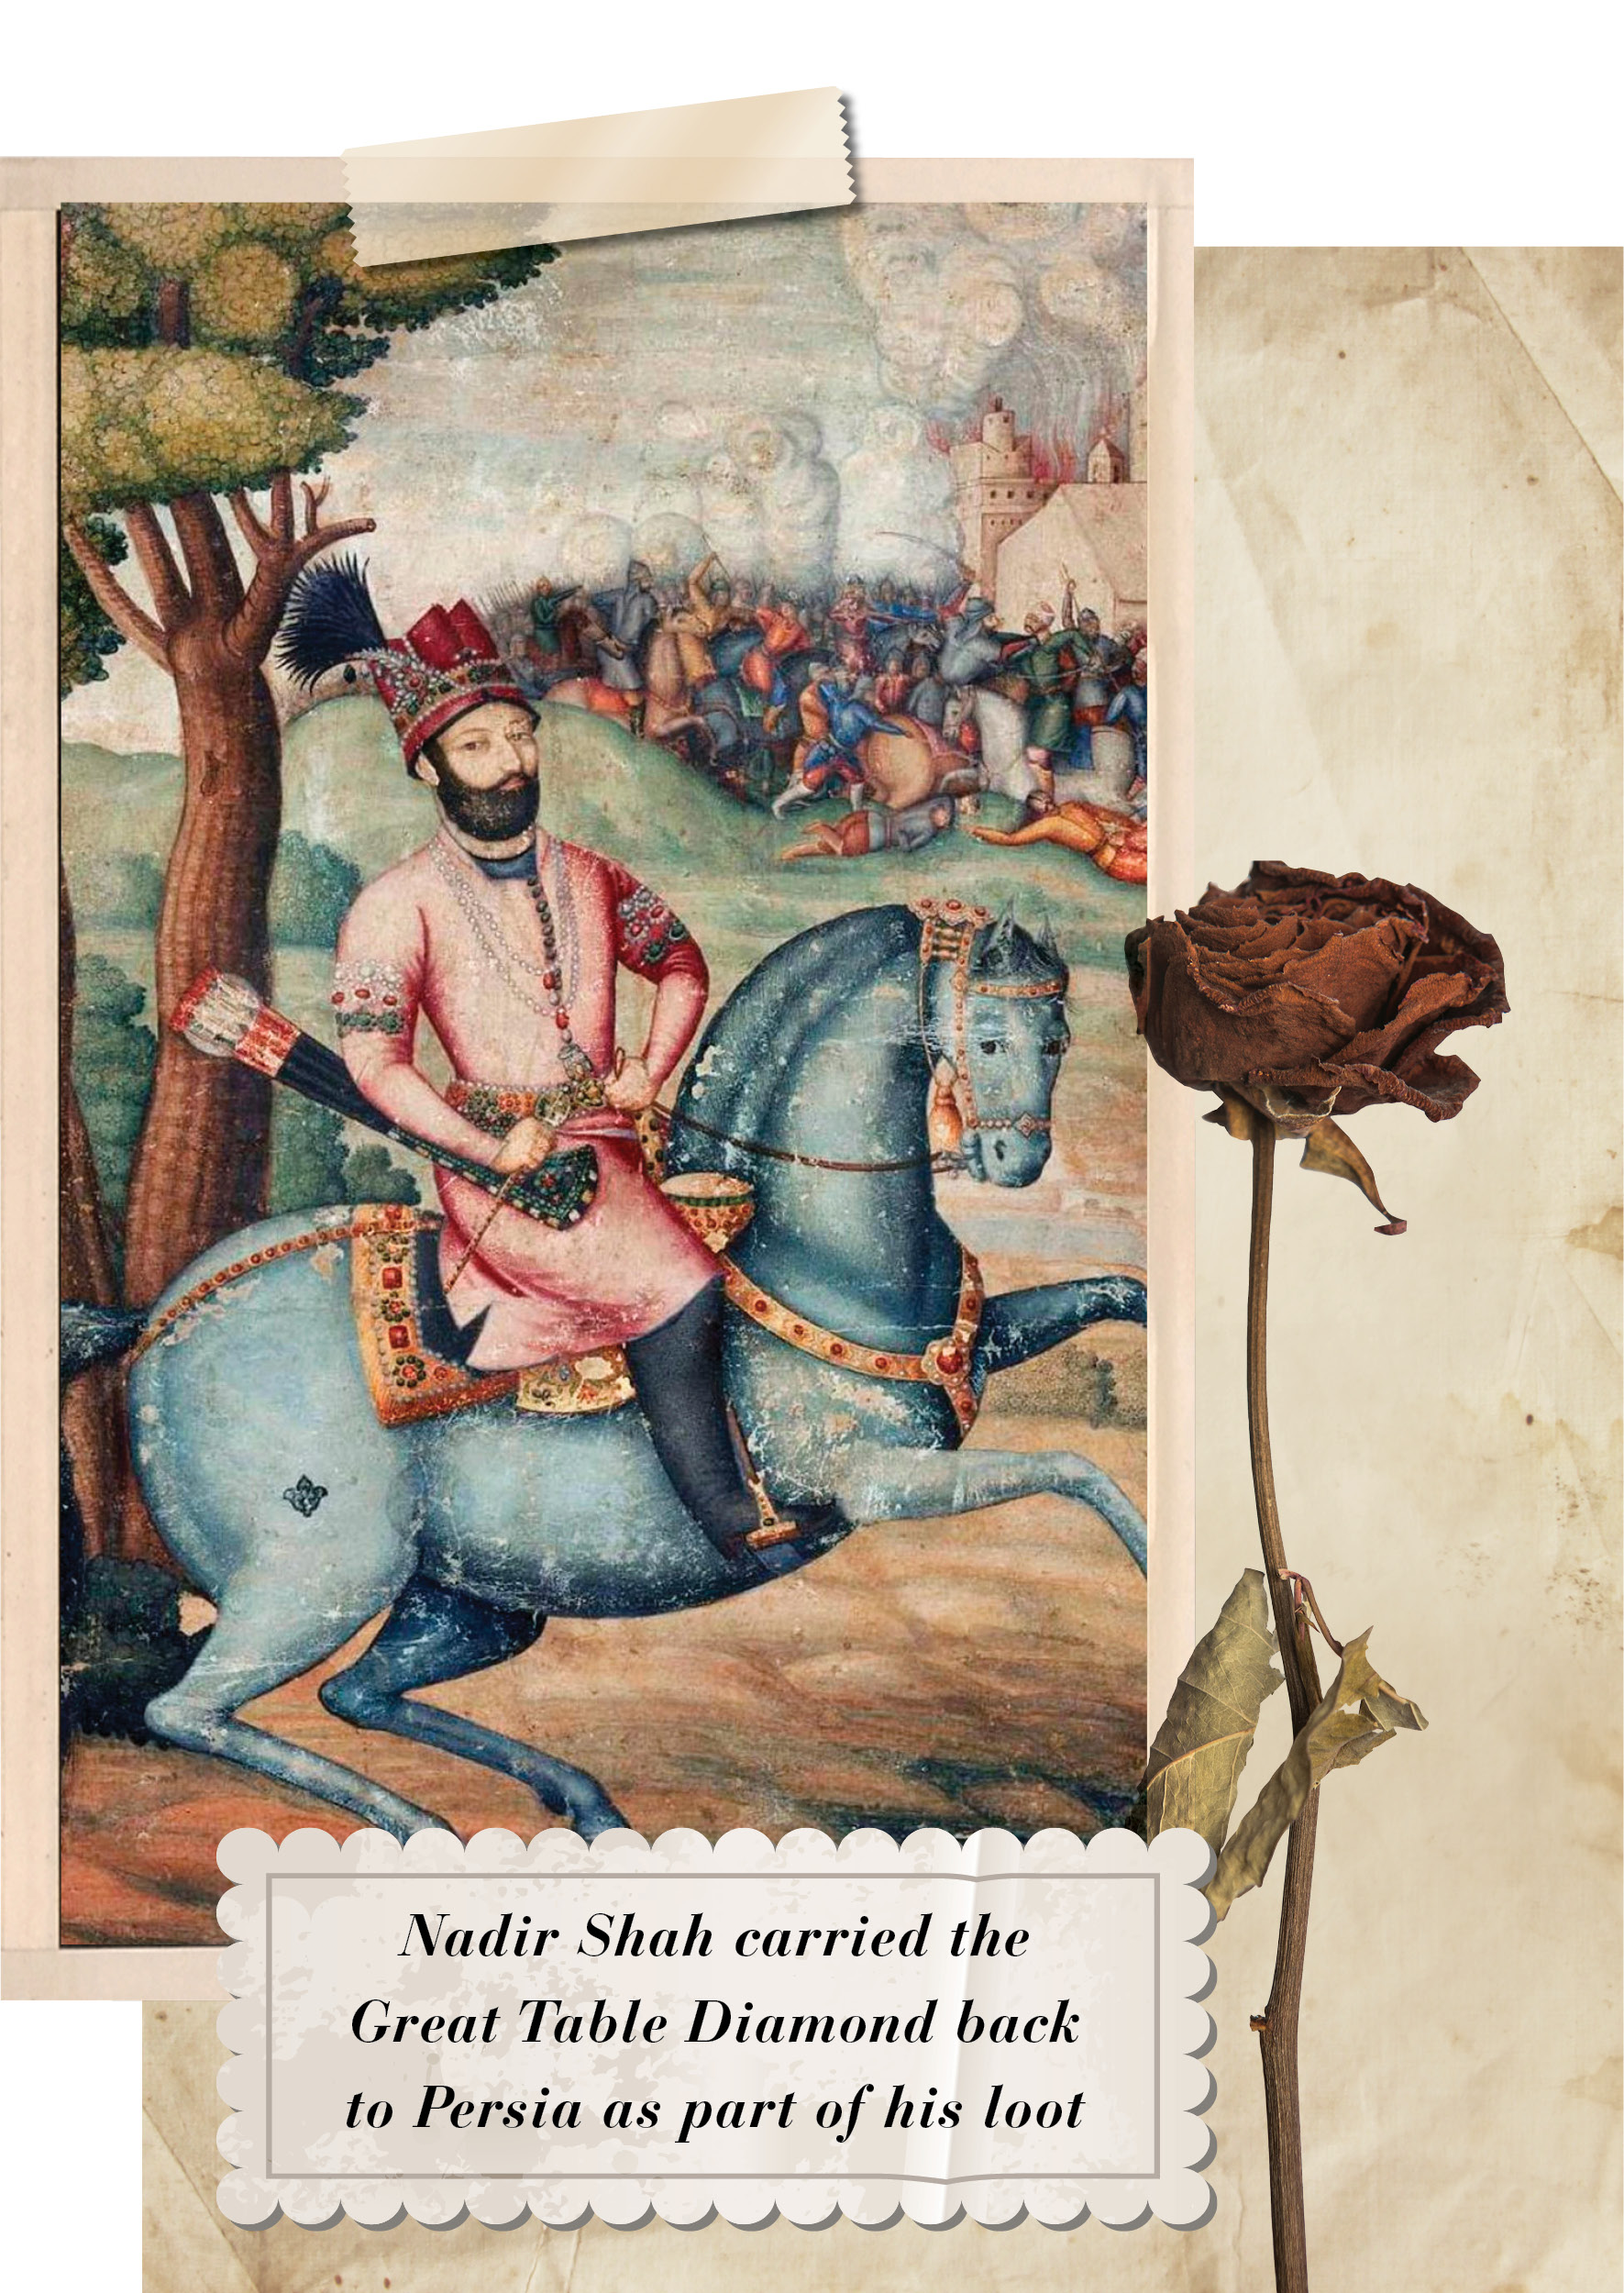 Nadir Shah Returning with the Great Table Diamond to Persia as Part of His Illustrious Loot 